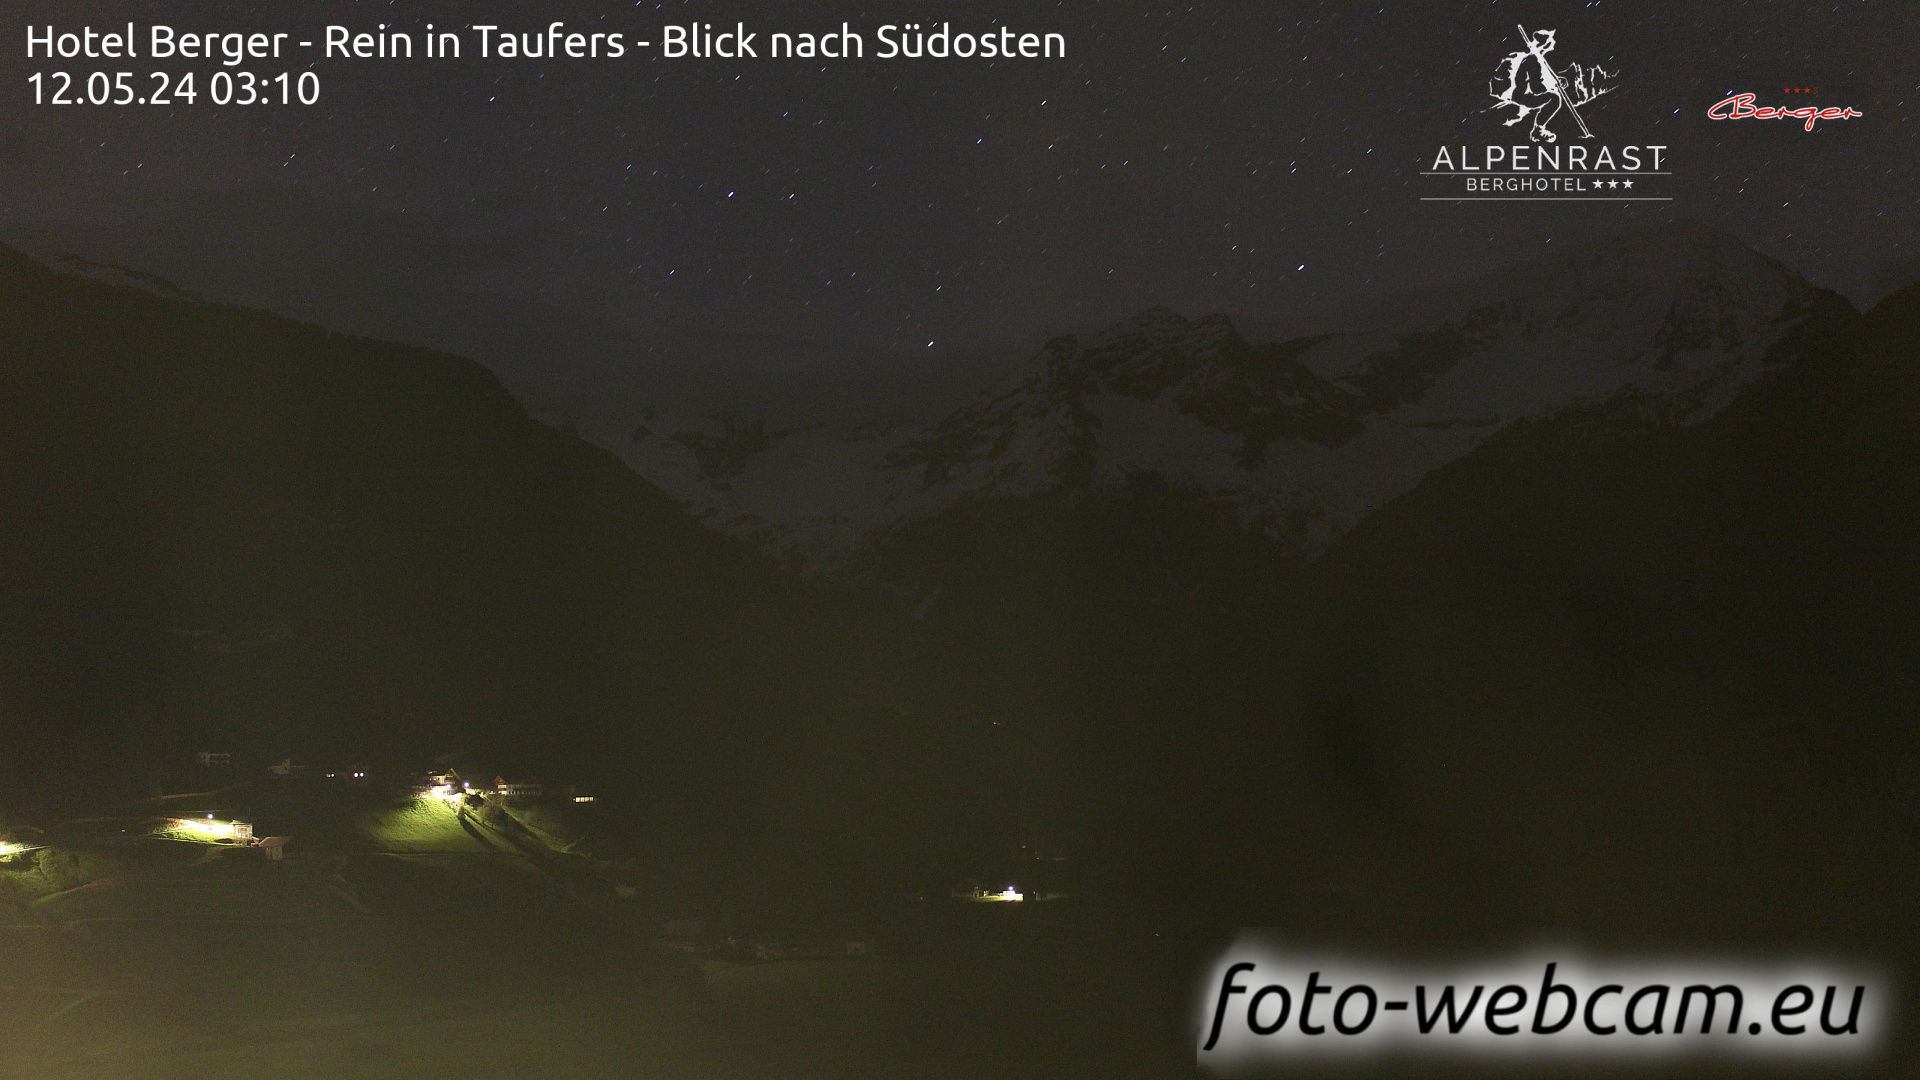 Rein in Taufers Me. 03:11